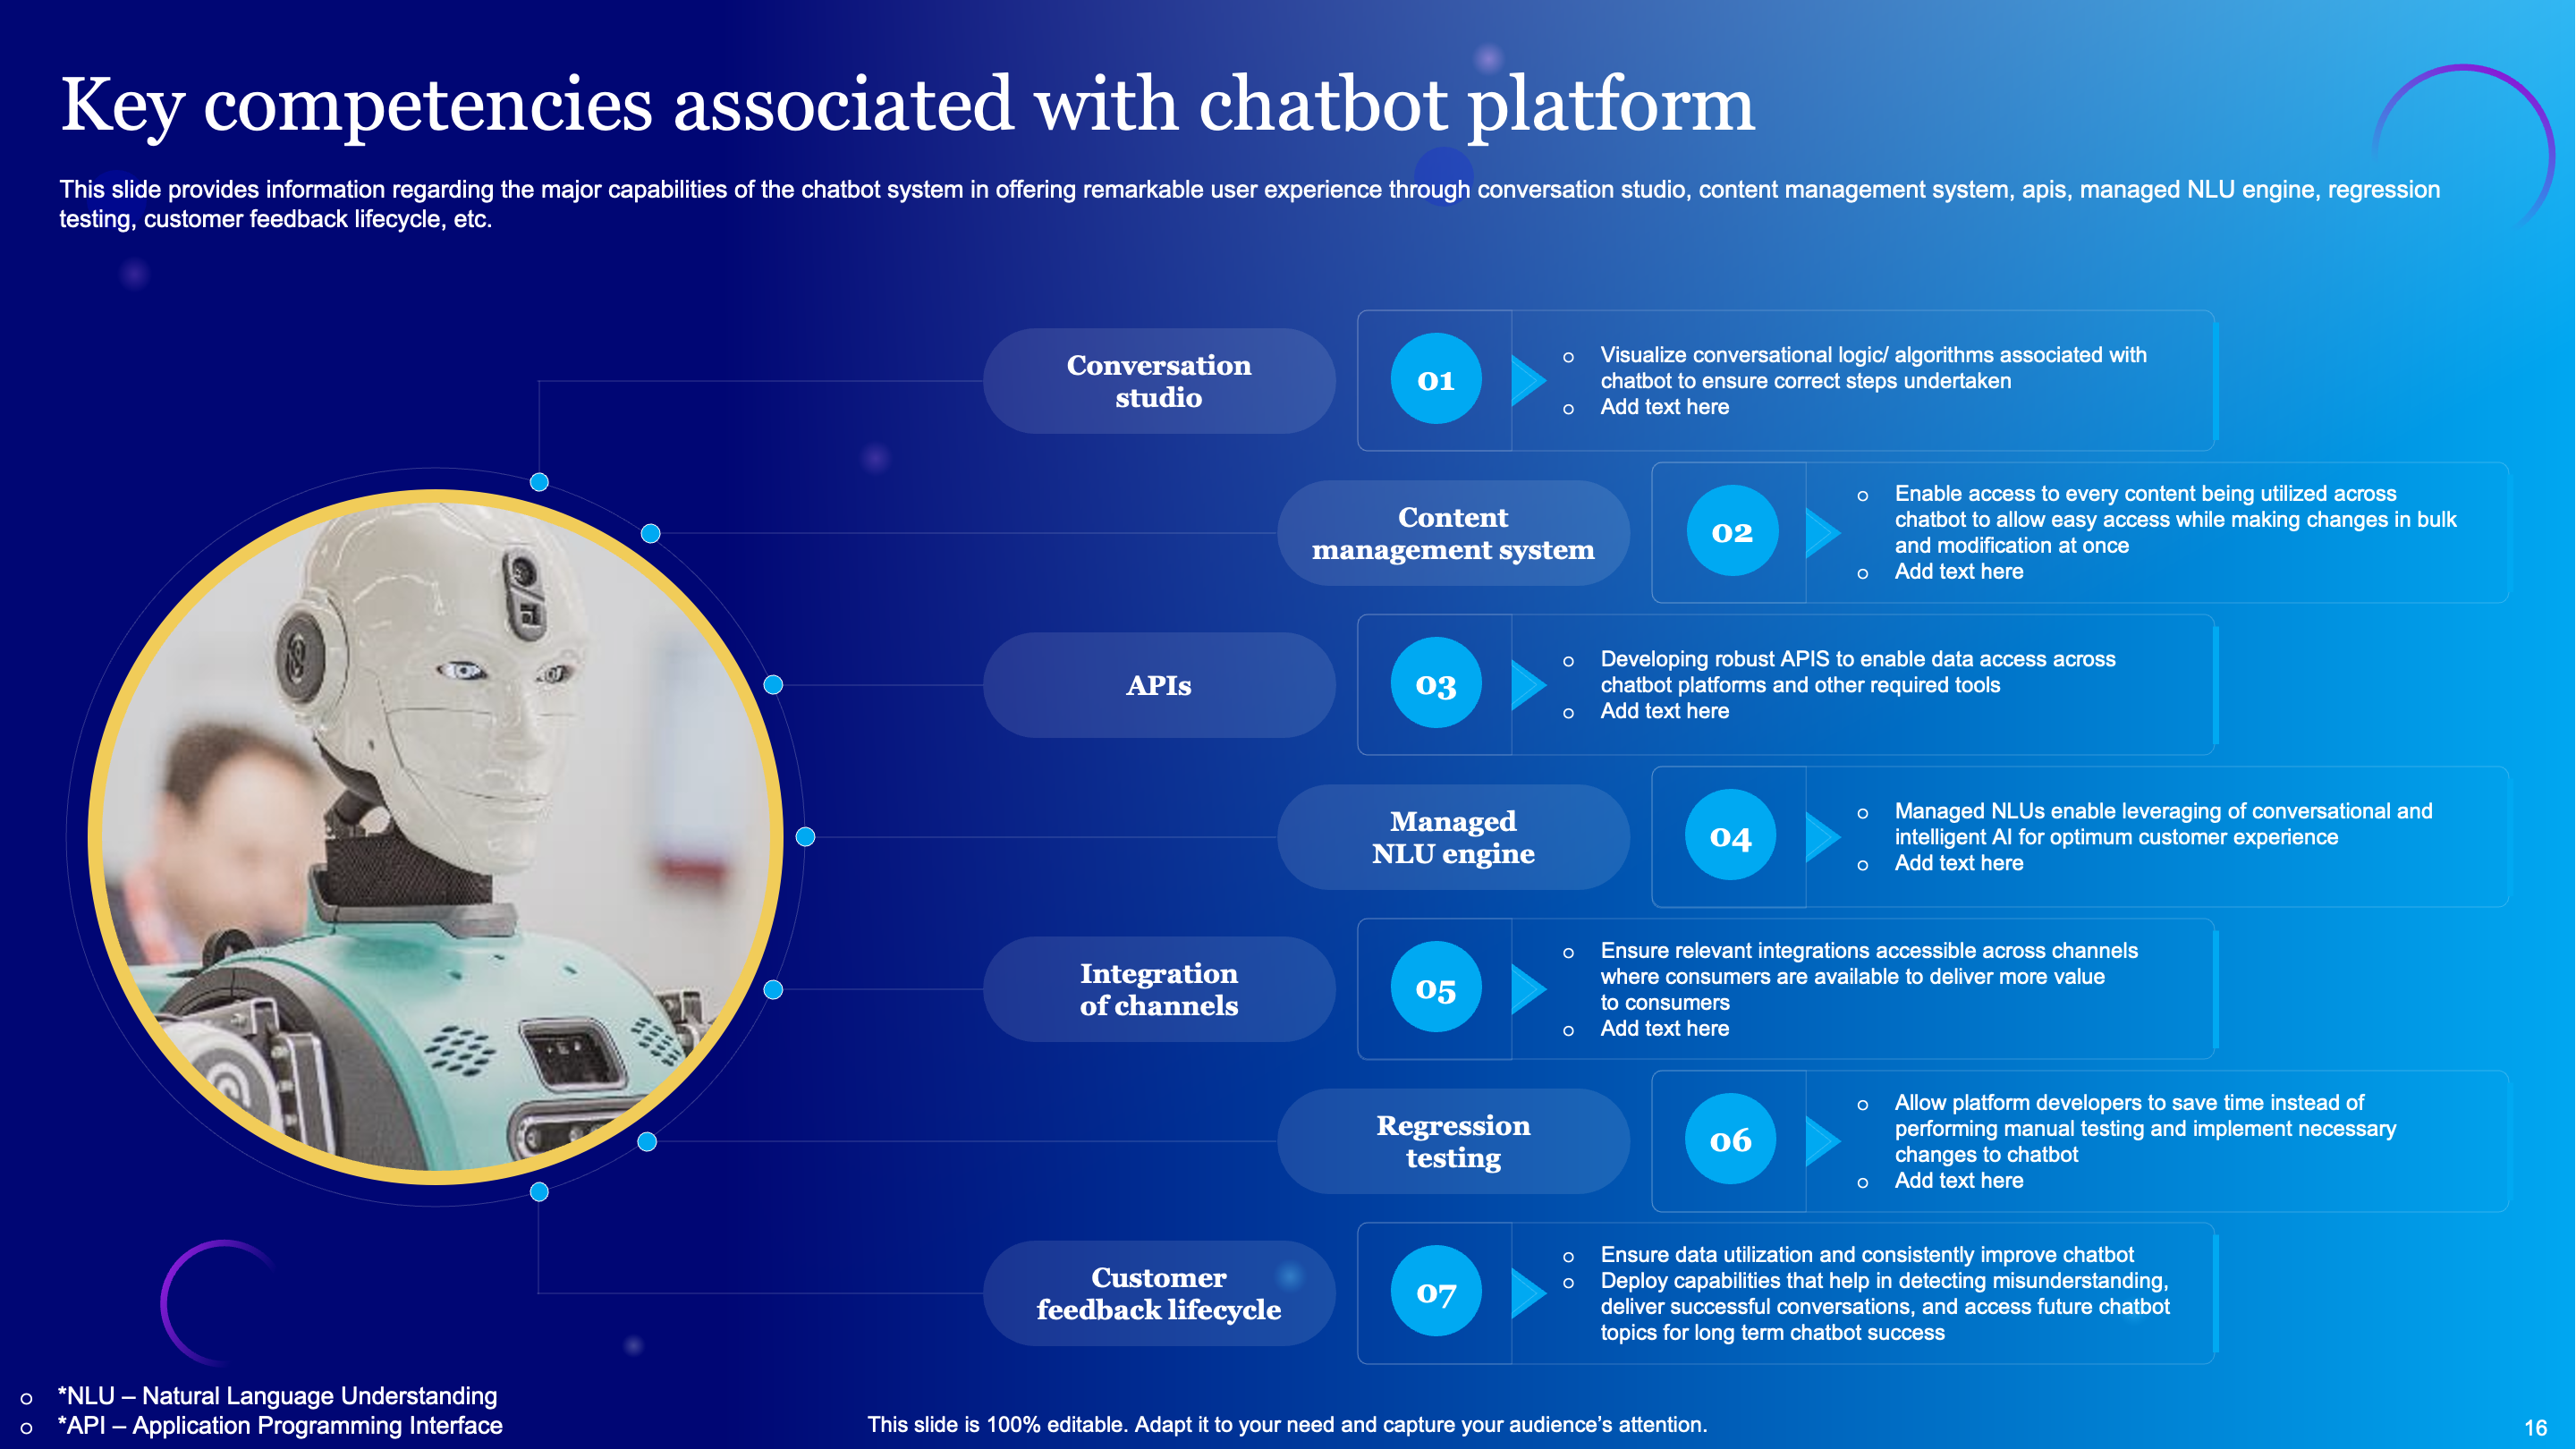 Key Competencies Associated with Chatbot Platform 